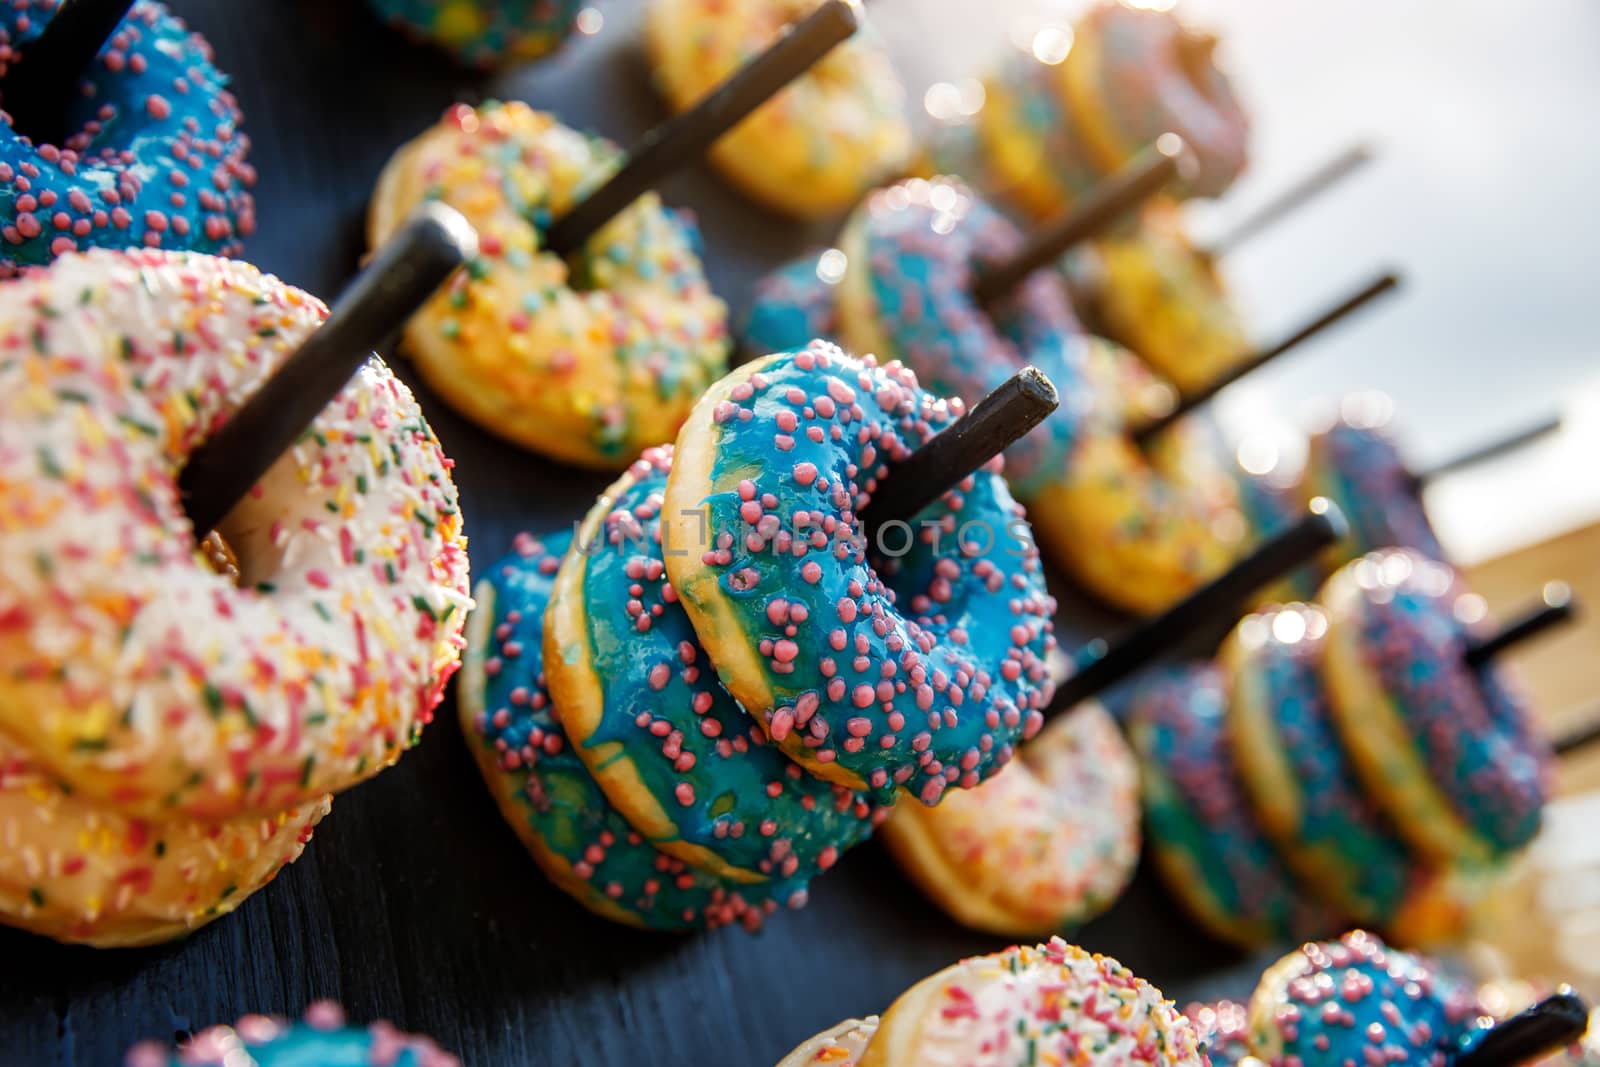 Assorted donuts on a wand. Dessert colorful snack.